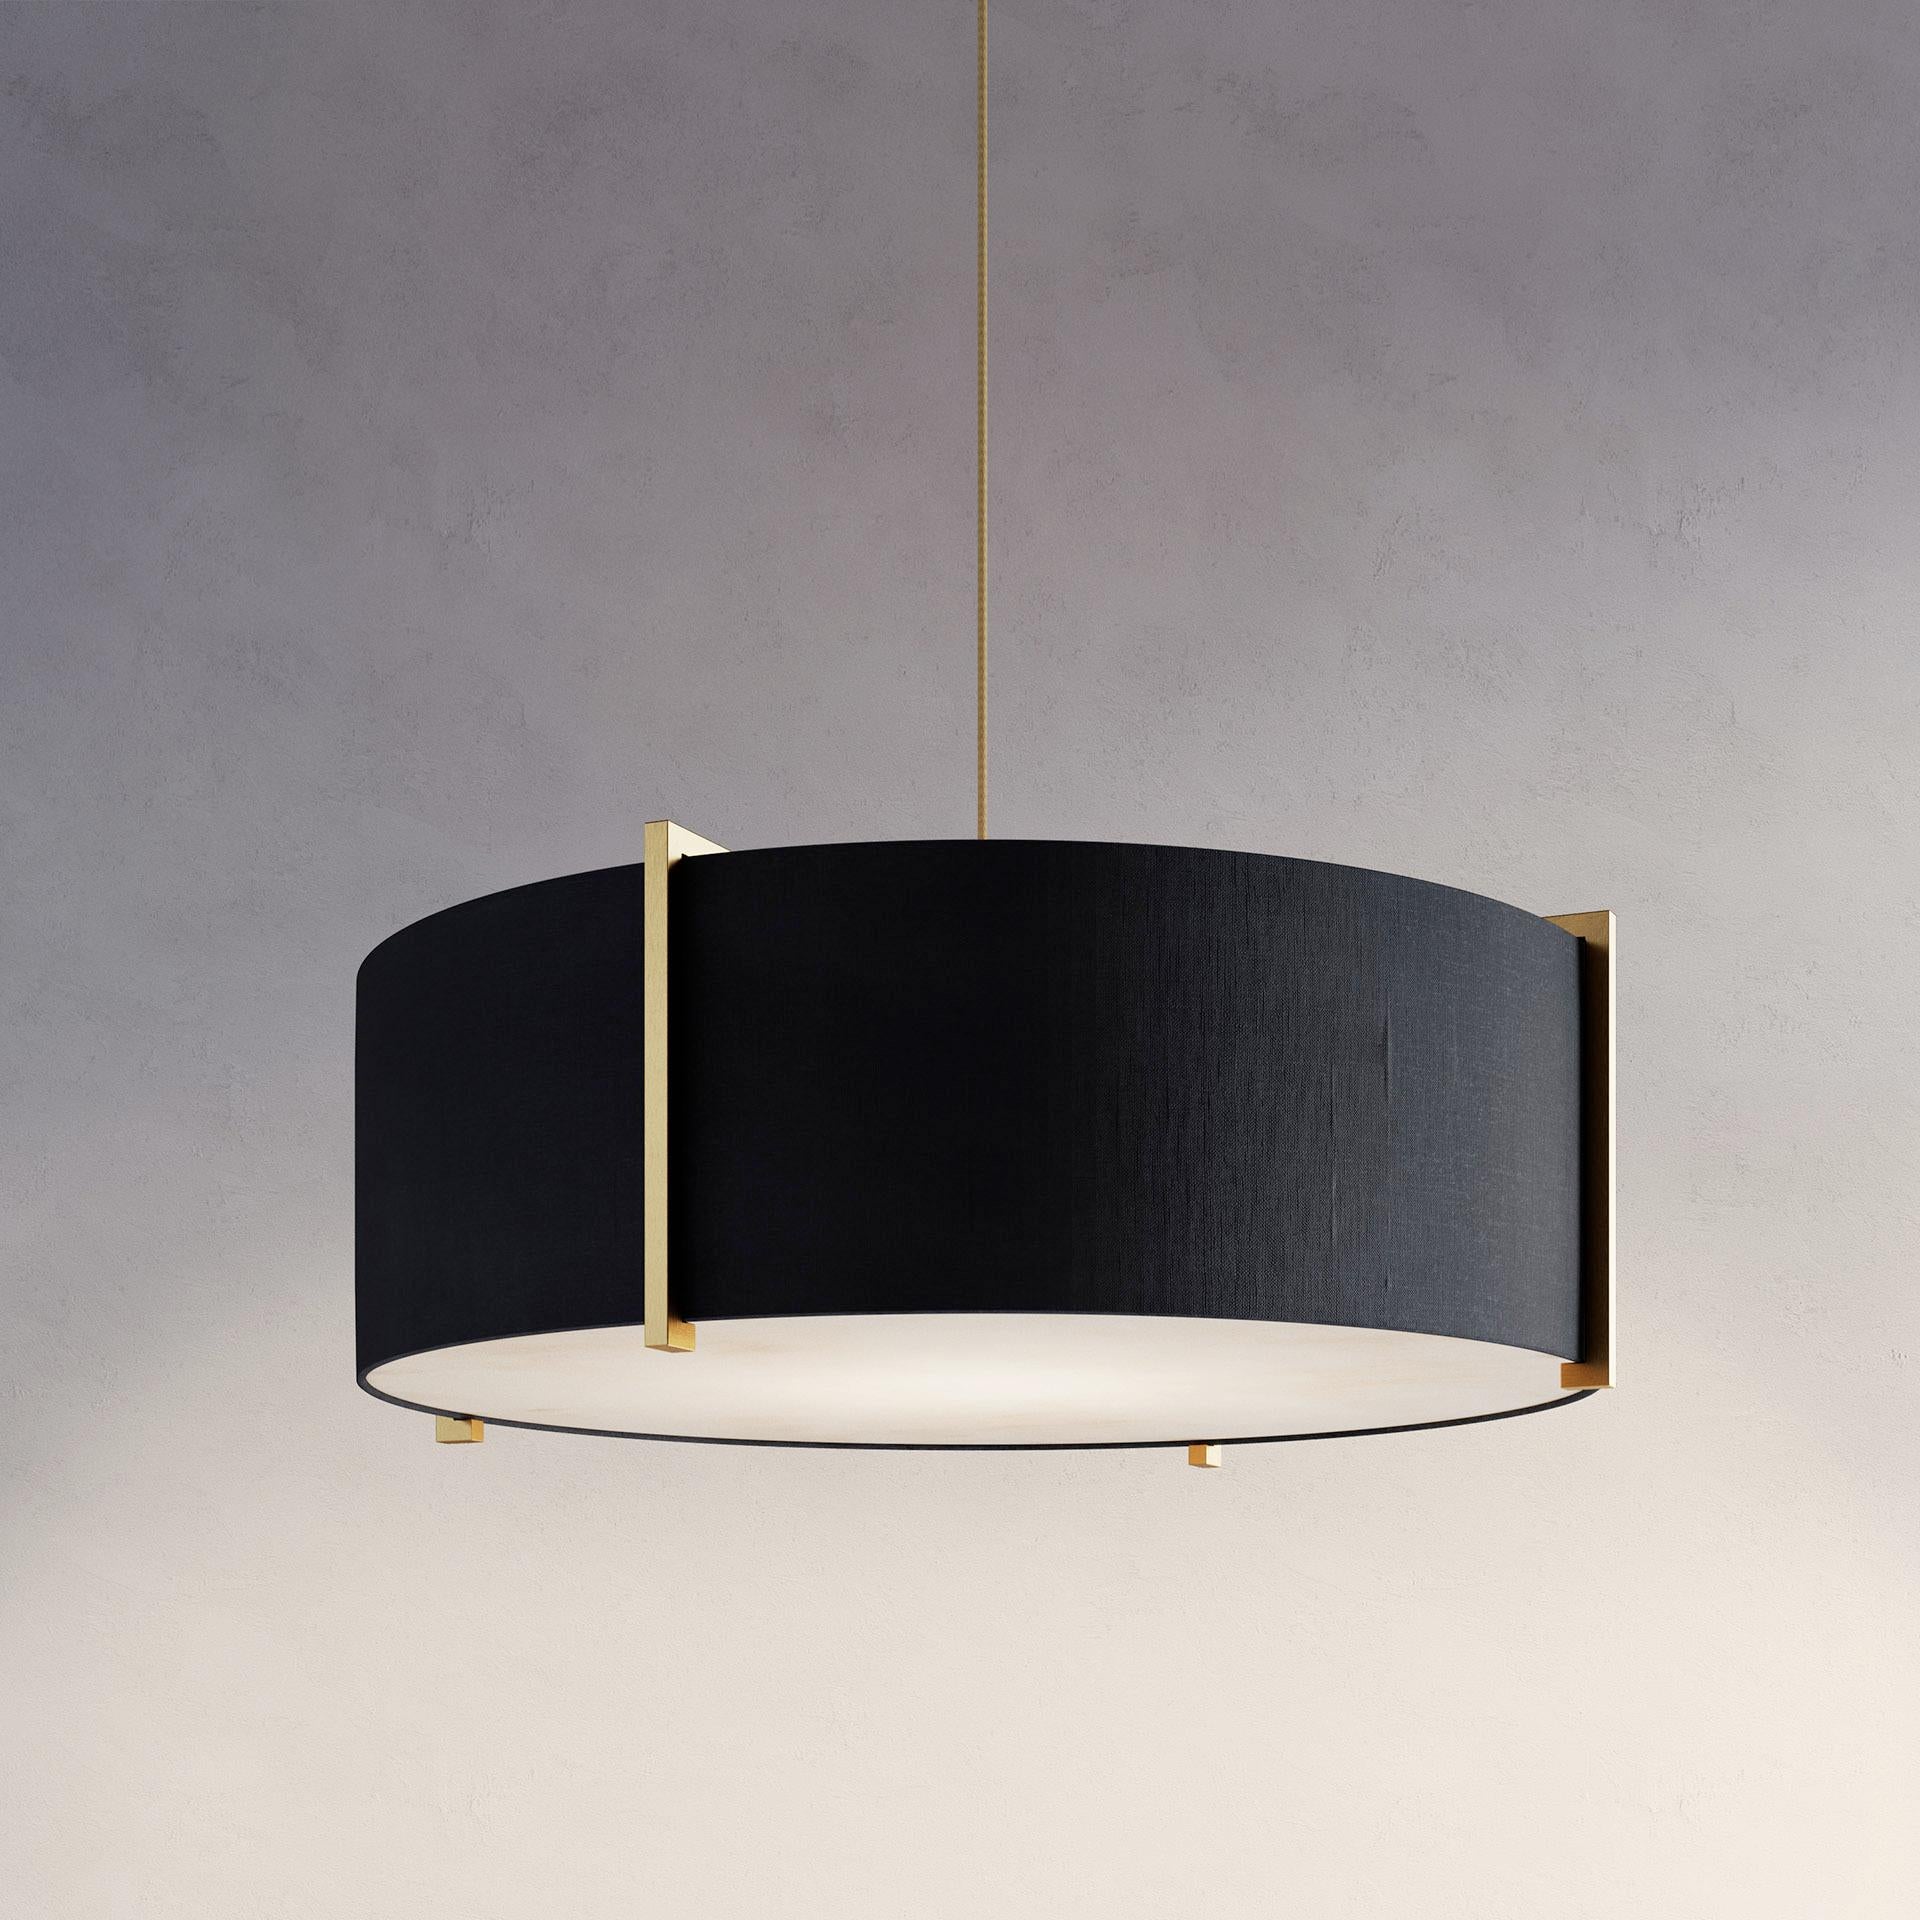 Soleil Pendant Carbon by Atelier001
Dimensions: D80 x H36 cm
Materials: Silk, Brass.
Also Available: In different finishes. 

All our lamps can be wired according to each country. If sold to the USA it will be wired for the USA for instance.

A